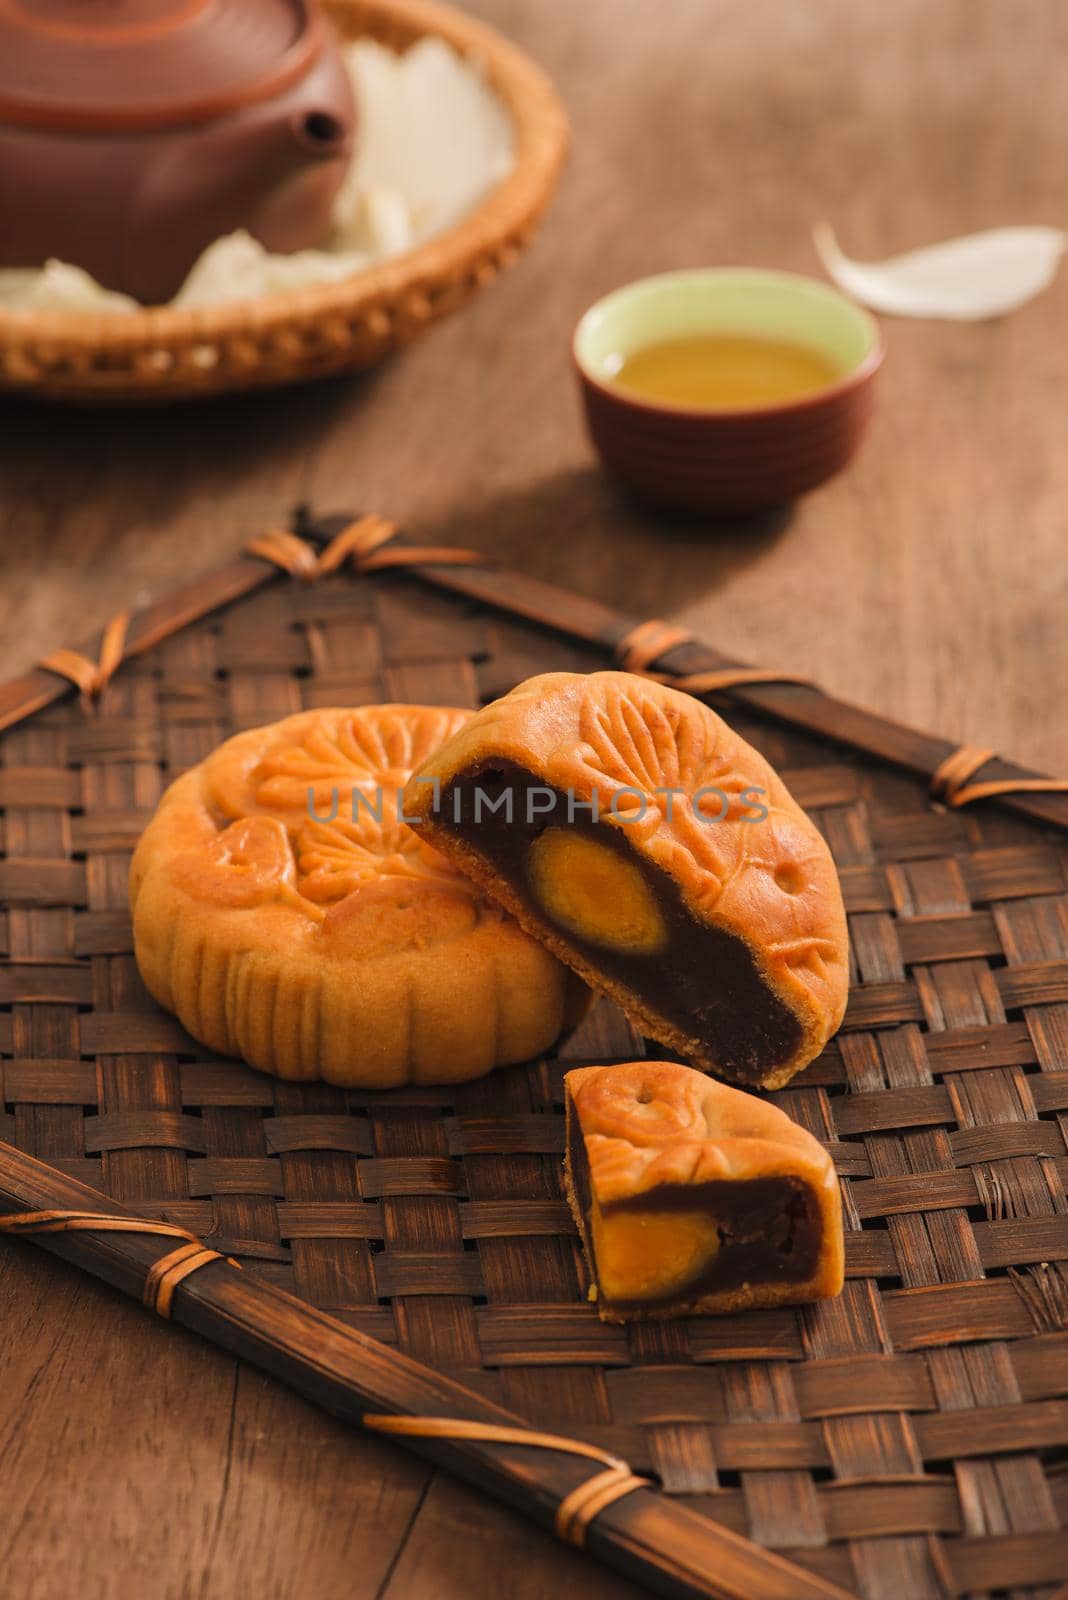 Mooncakes,which are Vietnamese pastries traditionally eaten during the Mid-Autumn Festival